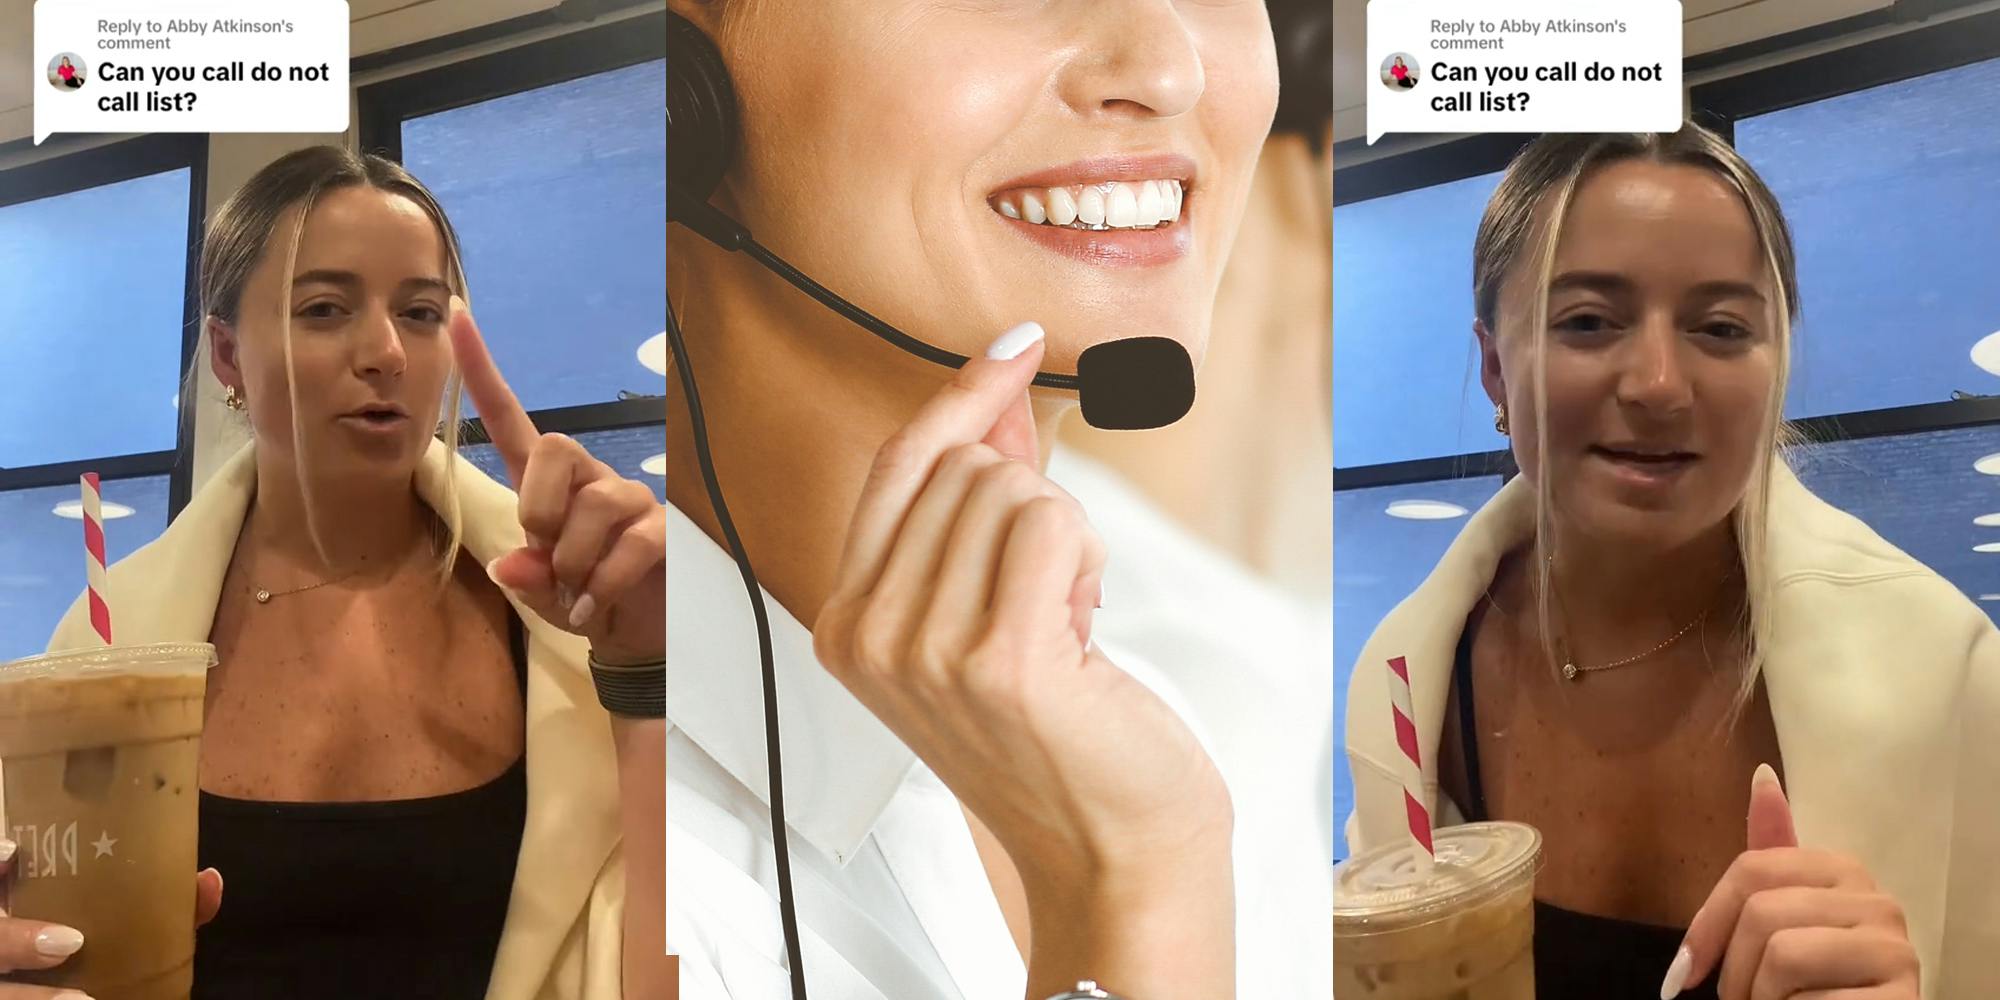 worker speaking with caption "Can you call do not call list?" (l) woman speaking into microphone at work (c) worker speaking with caption "Can you call do not call list?" (r)